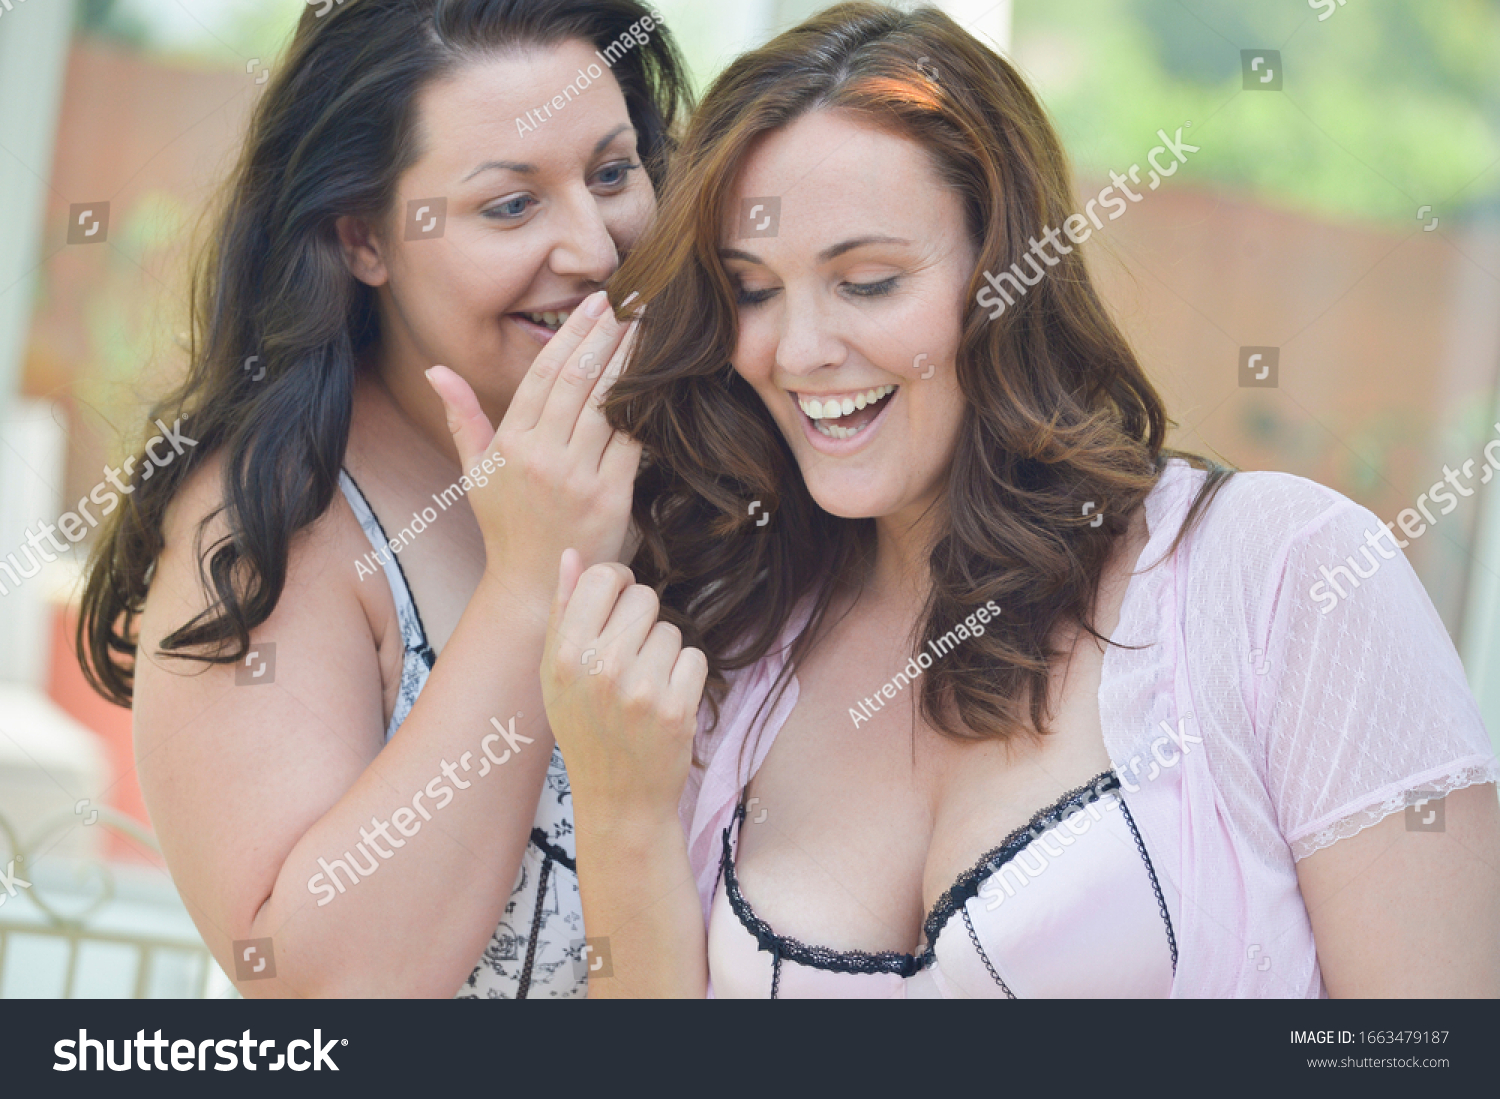 stock-photo-mid-adult-women-in-lingerie-laughing-1663479187.jpg